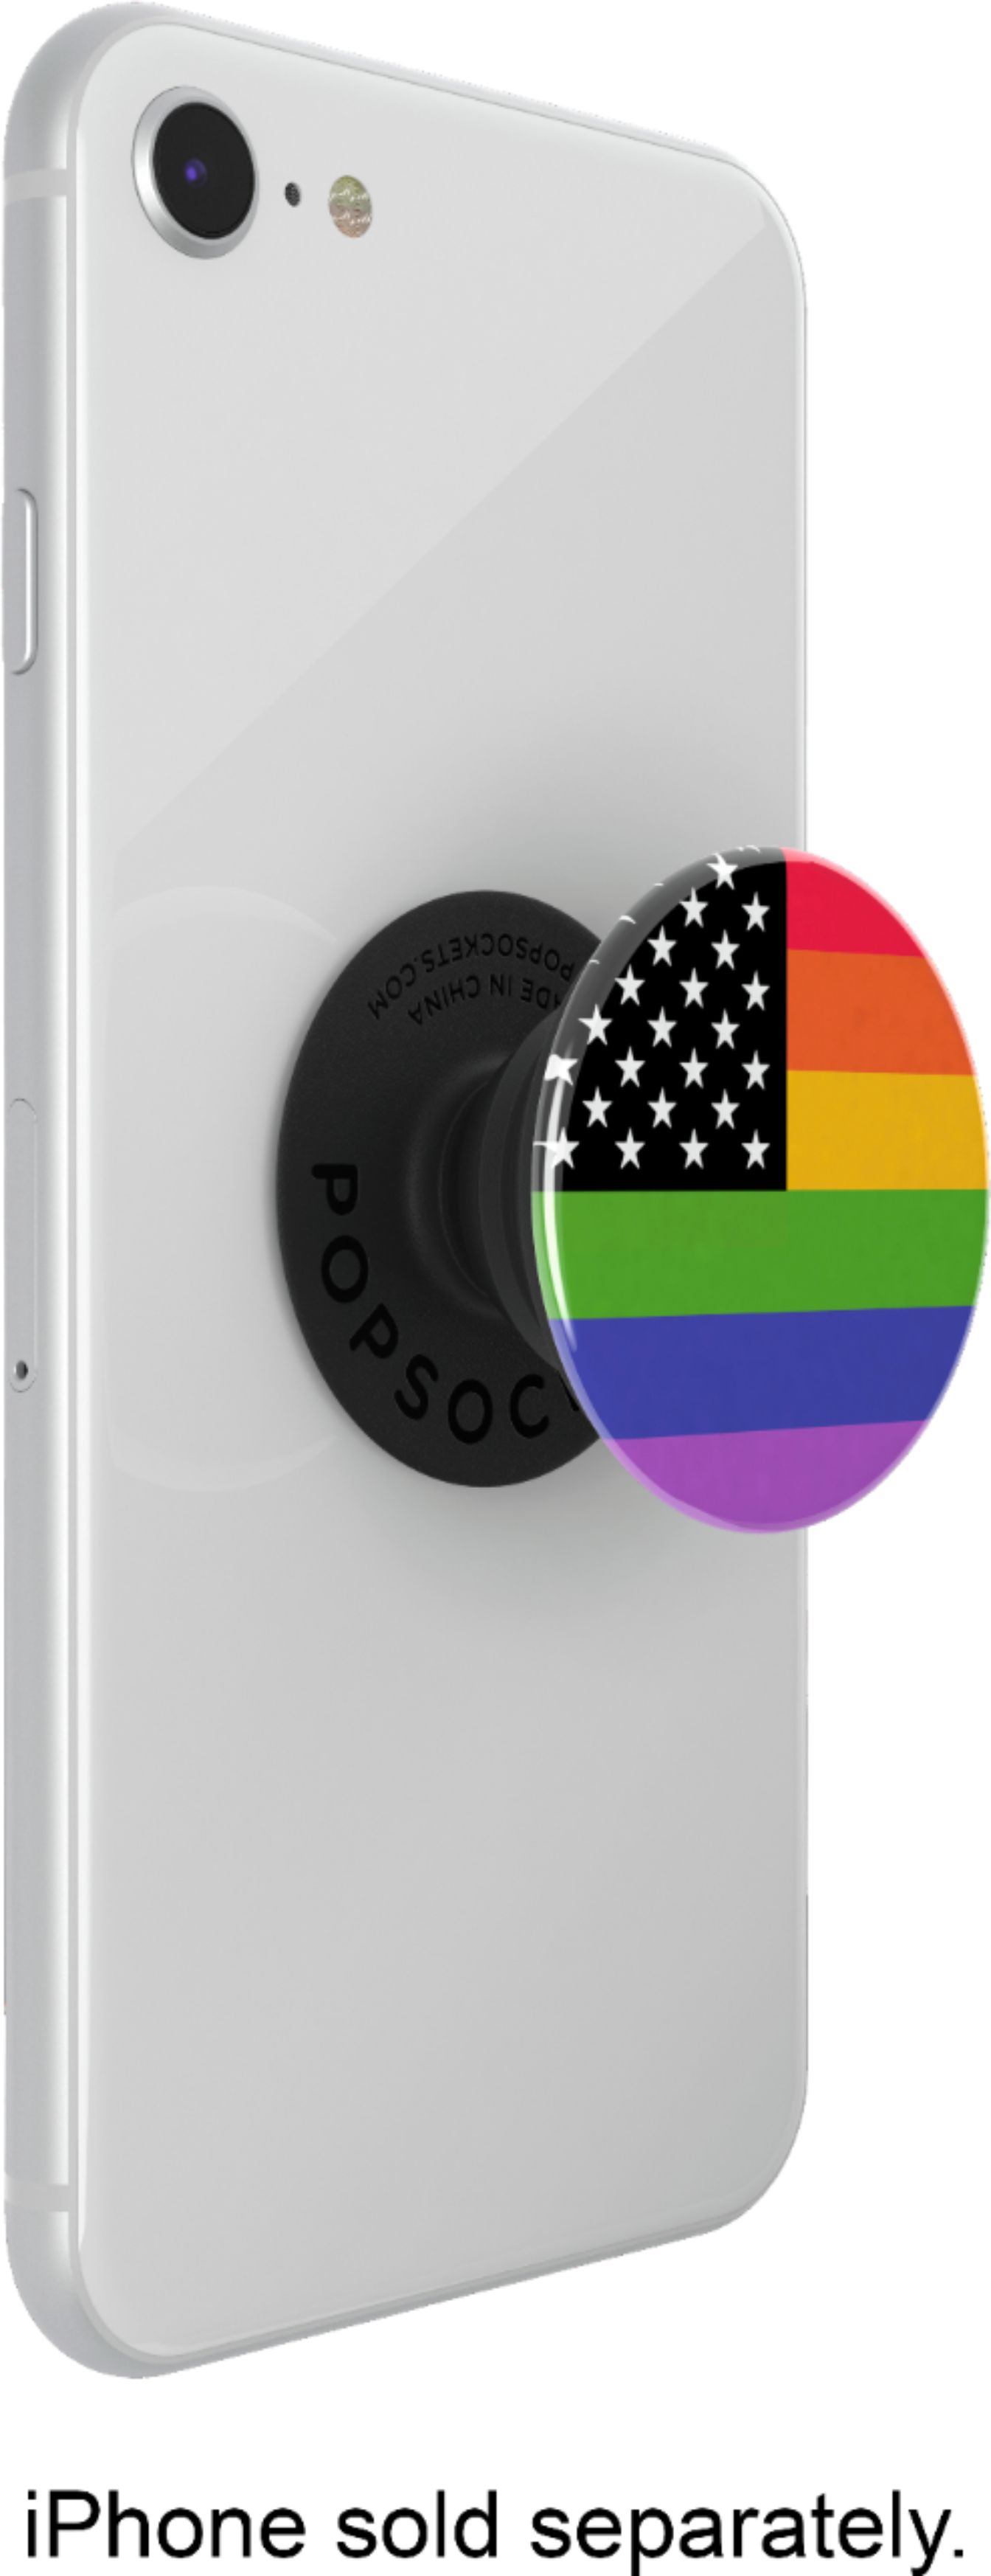 PopSockets Grip with Swappable Top for Cell Phones, PopGrip